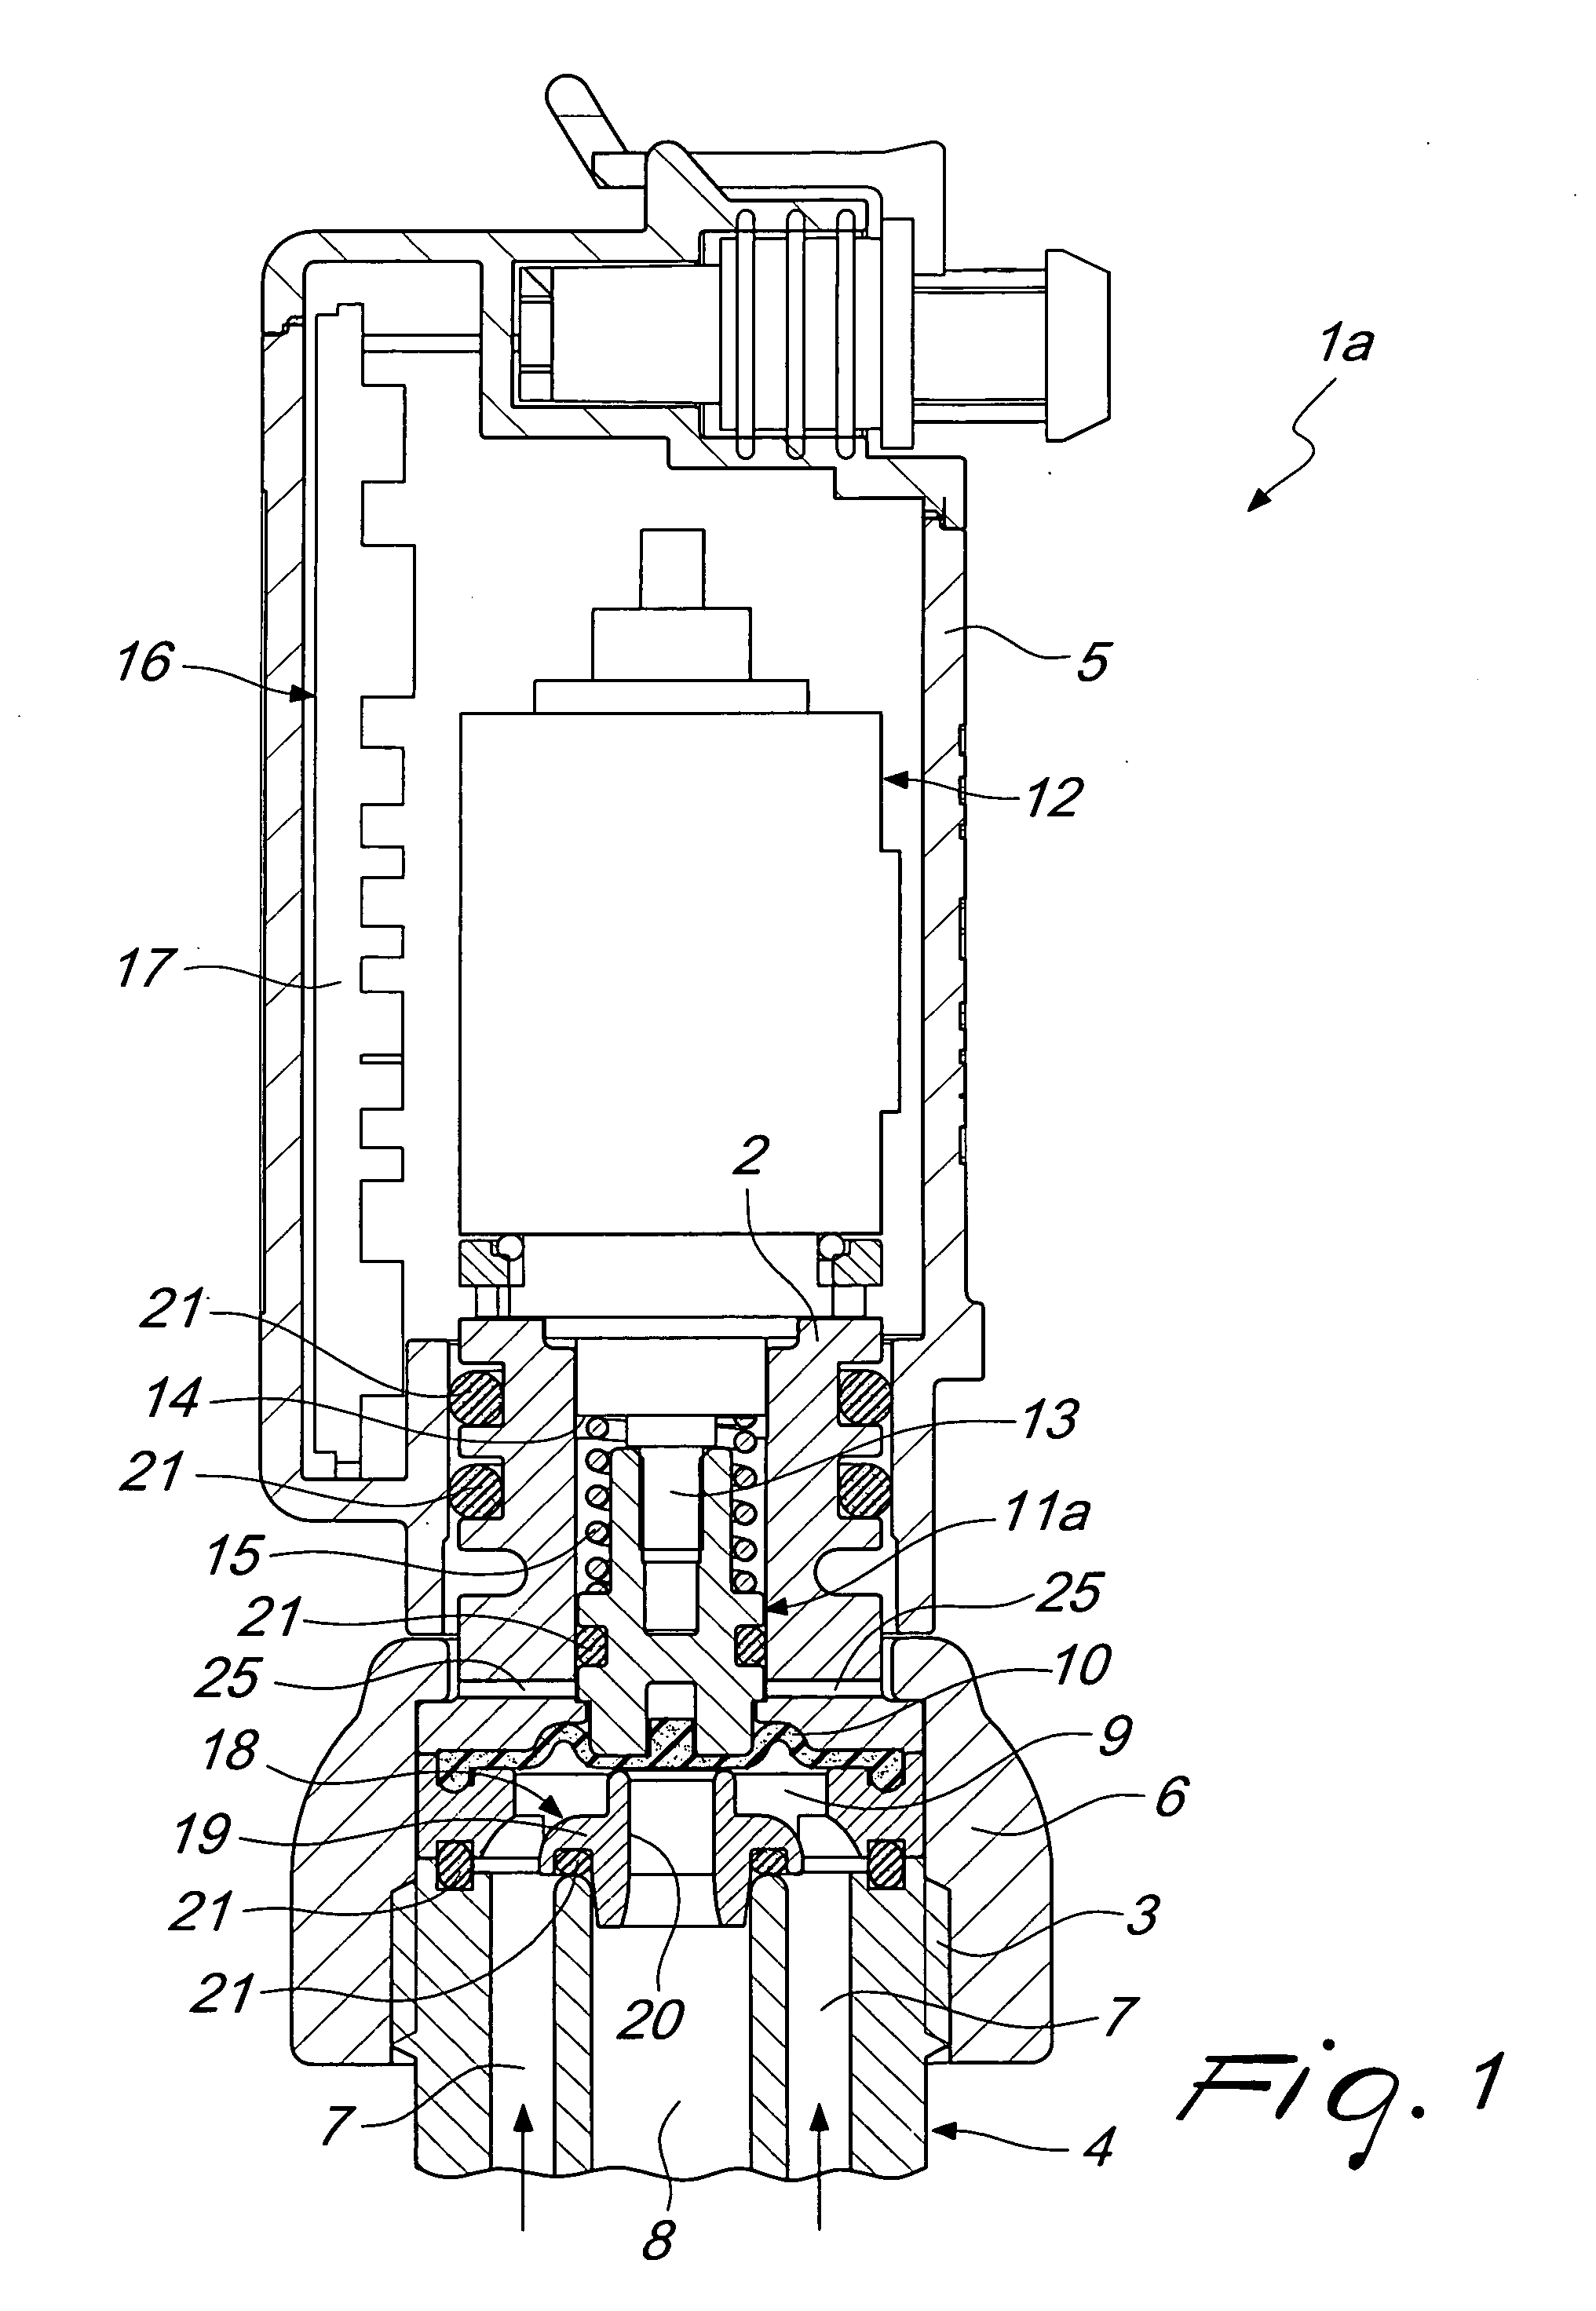 Electromechanically actuated membrane valve for branching ducts of sprinkling and/or weed control systems